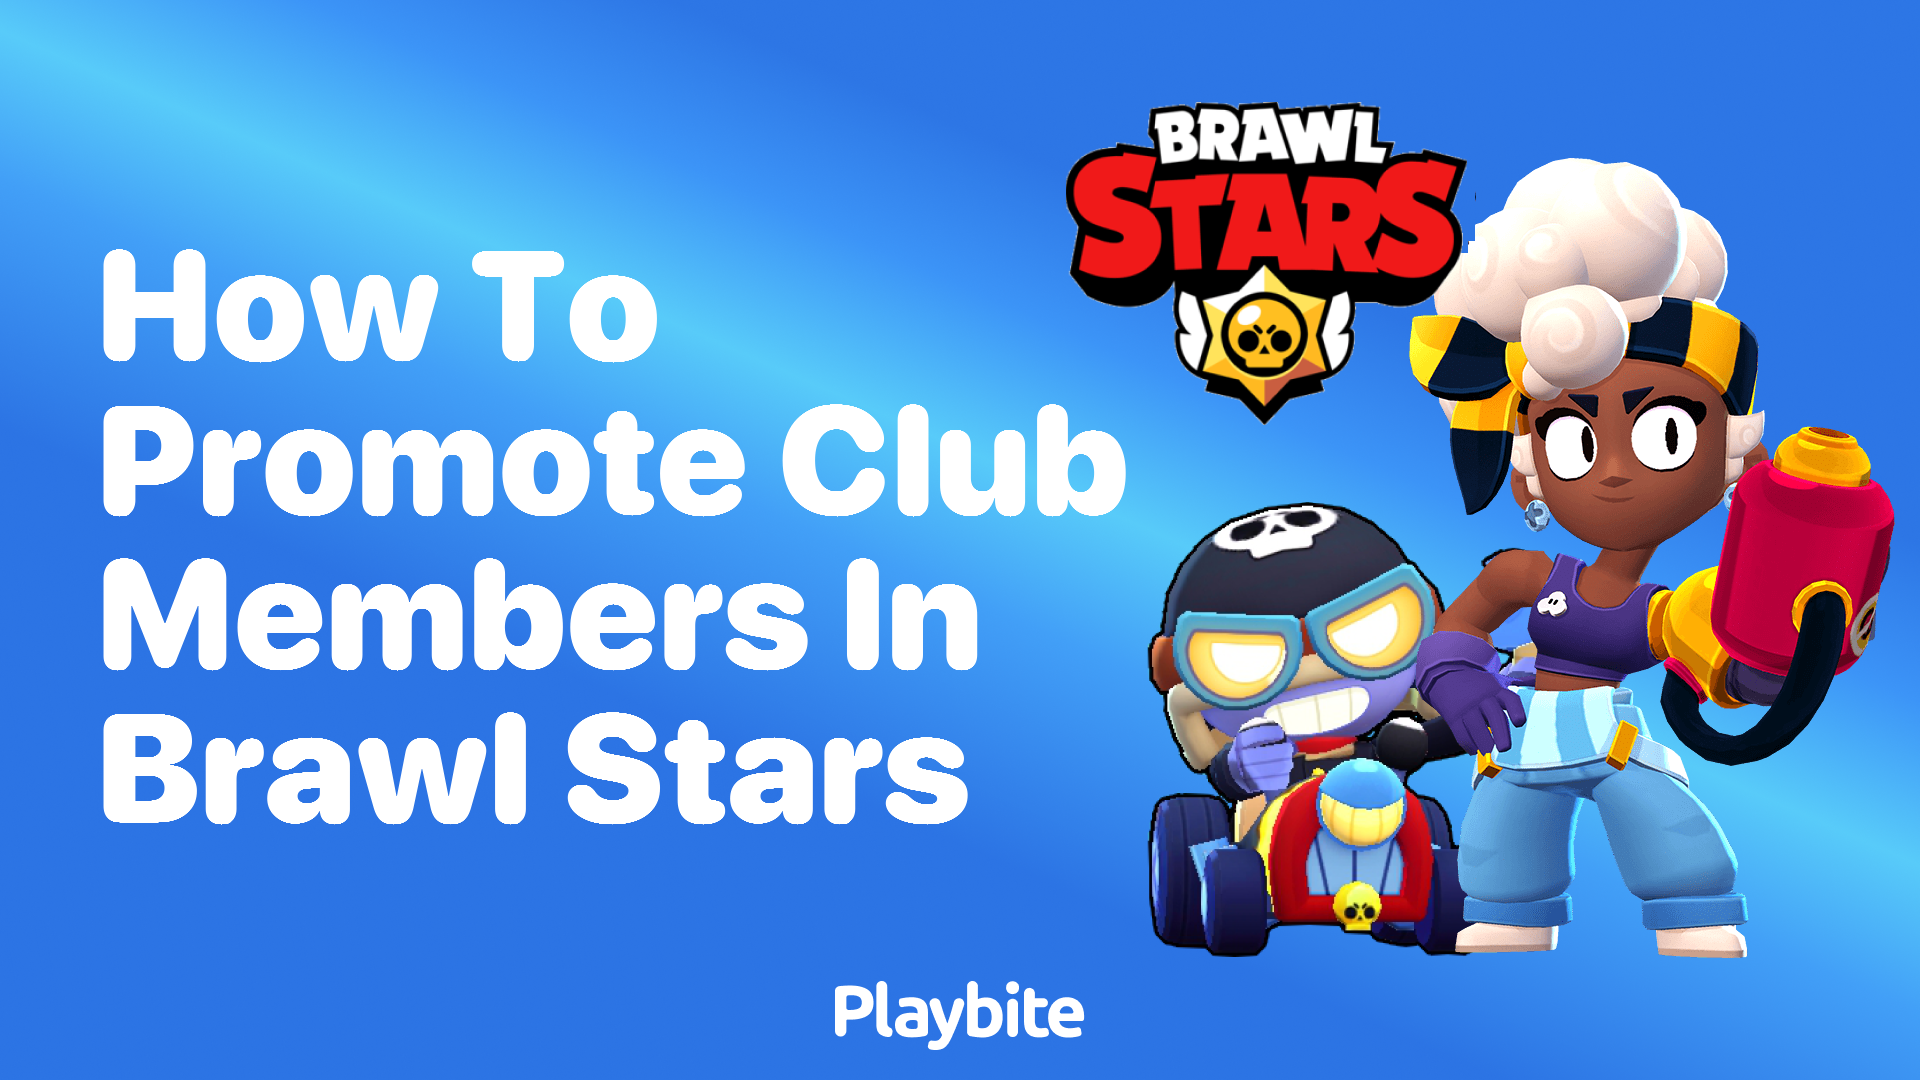 How to Promote Club Members in Brawl Stars